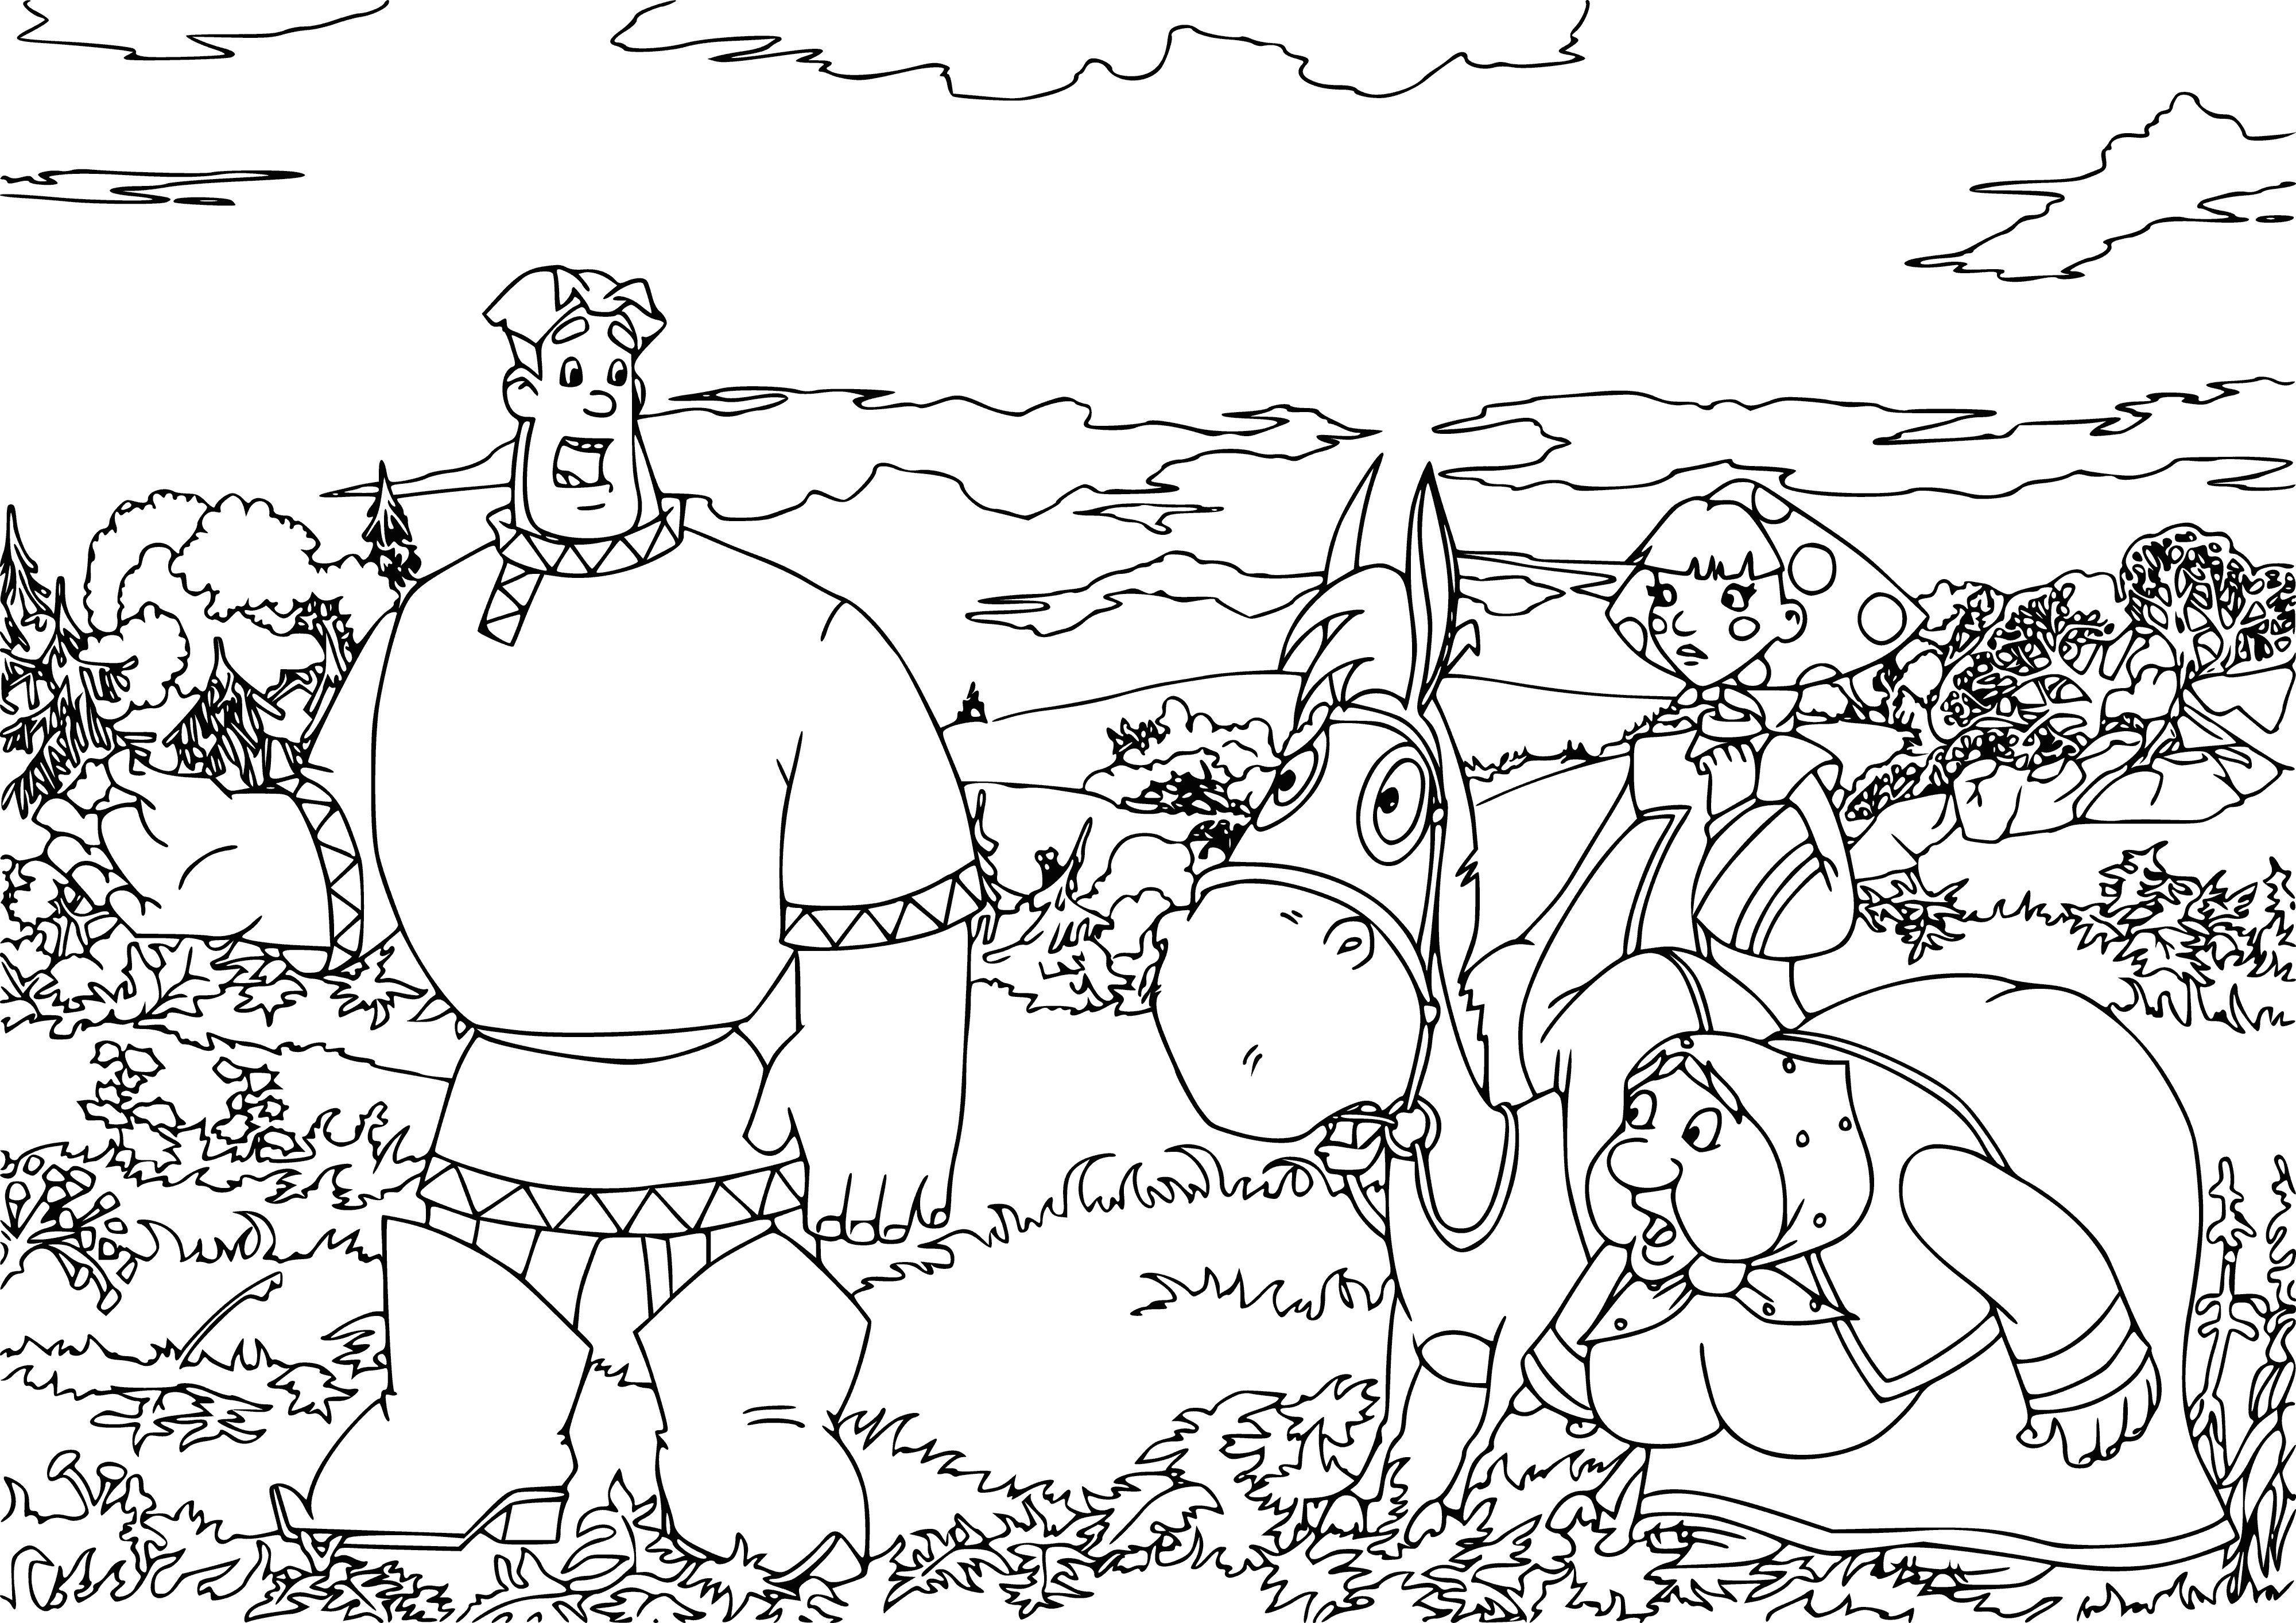 coloring page: Brave Alyosha Popovich saves Lyubava from Tugarin the serpent's kidnappings.